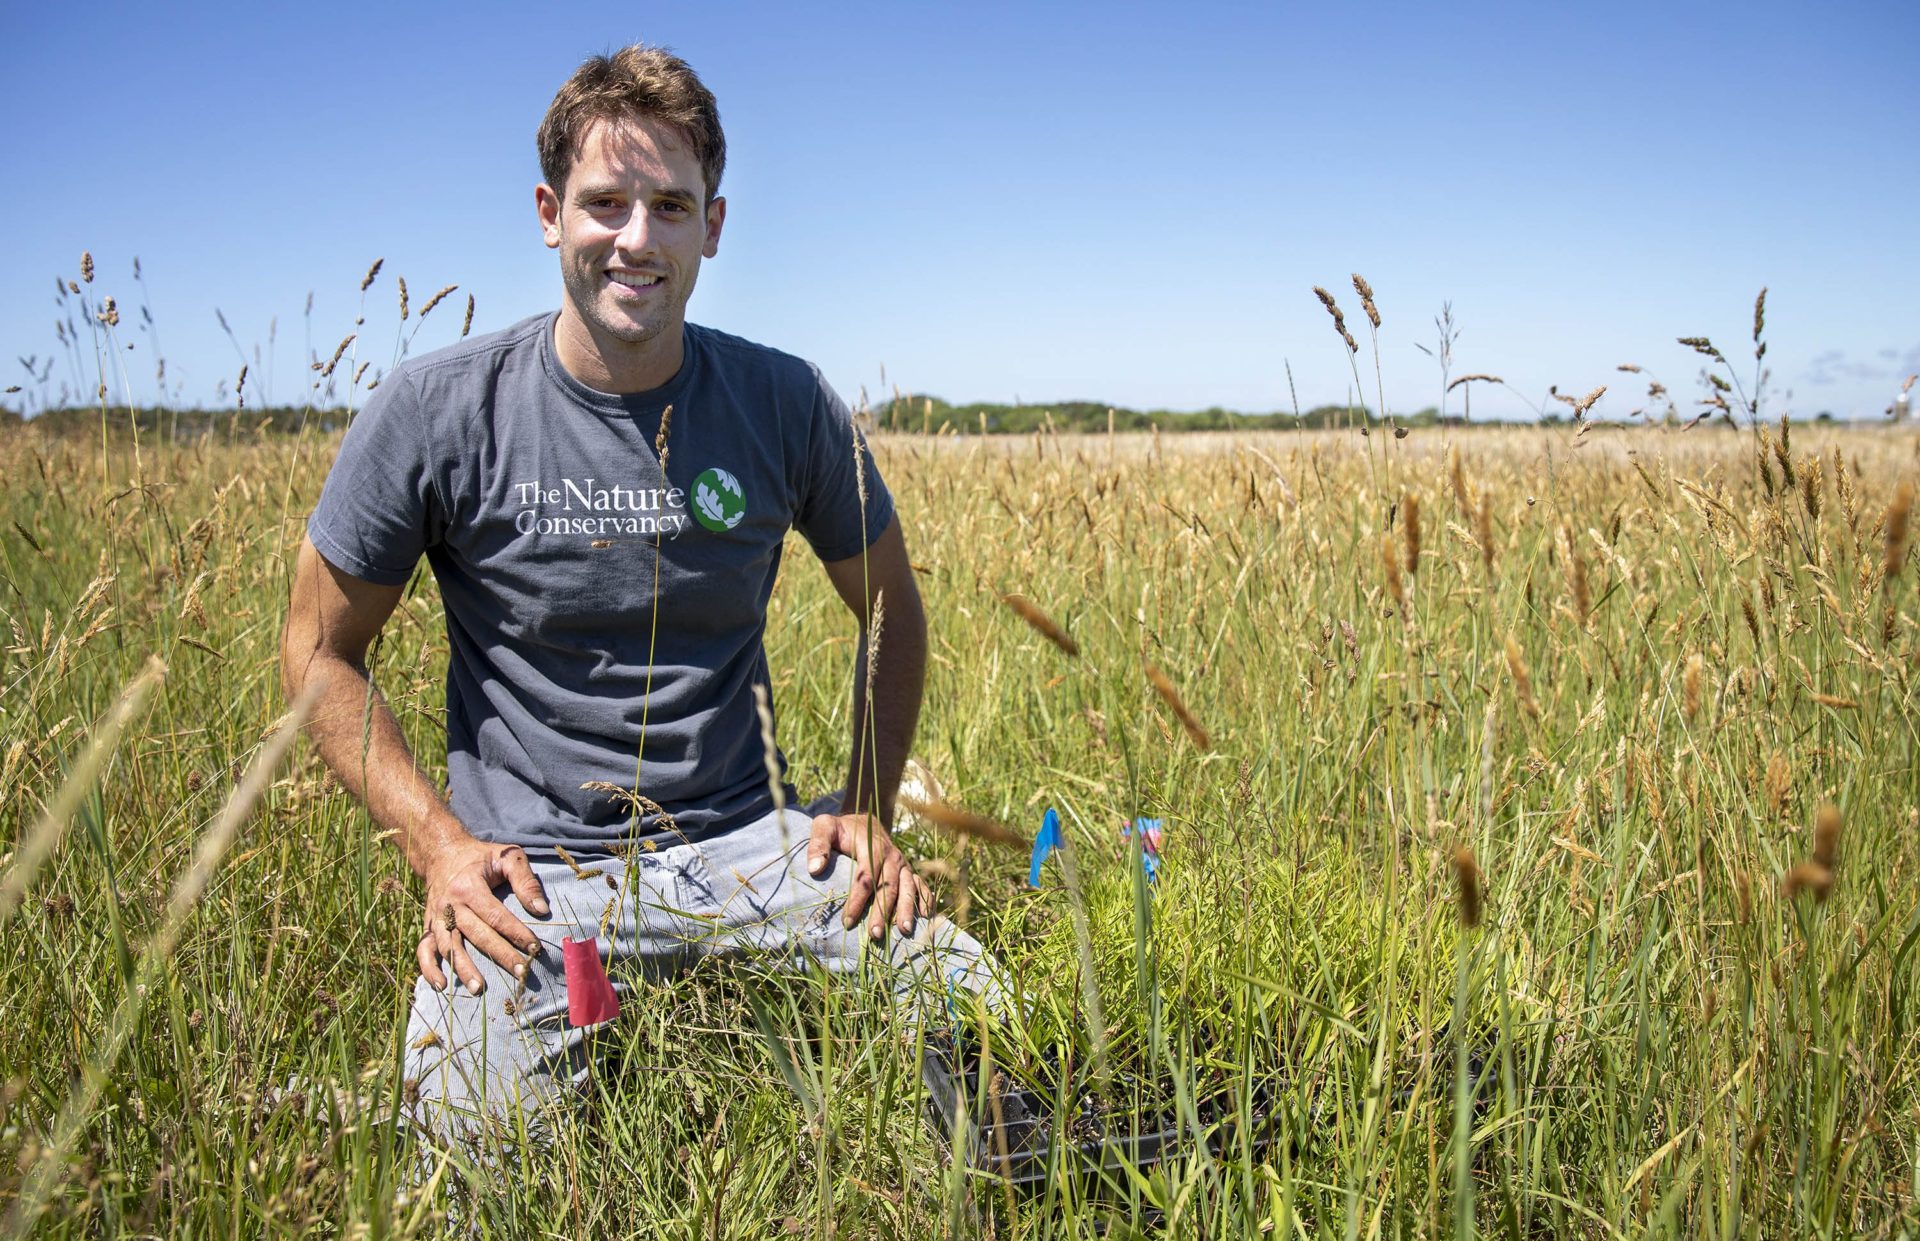 A man kneels in tall grass with diverse shapes and seed pods, smiling toward the camera.